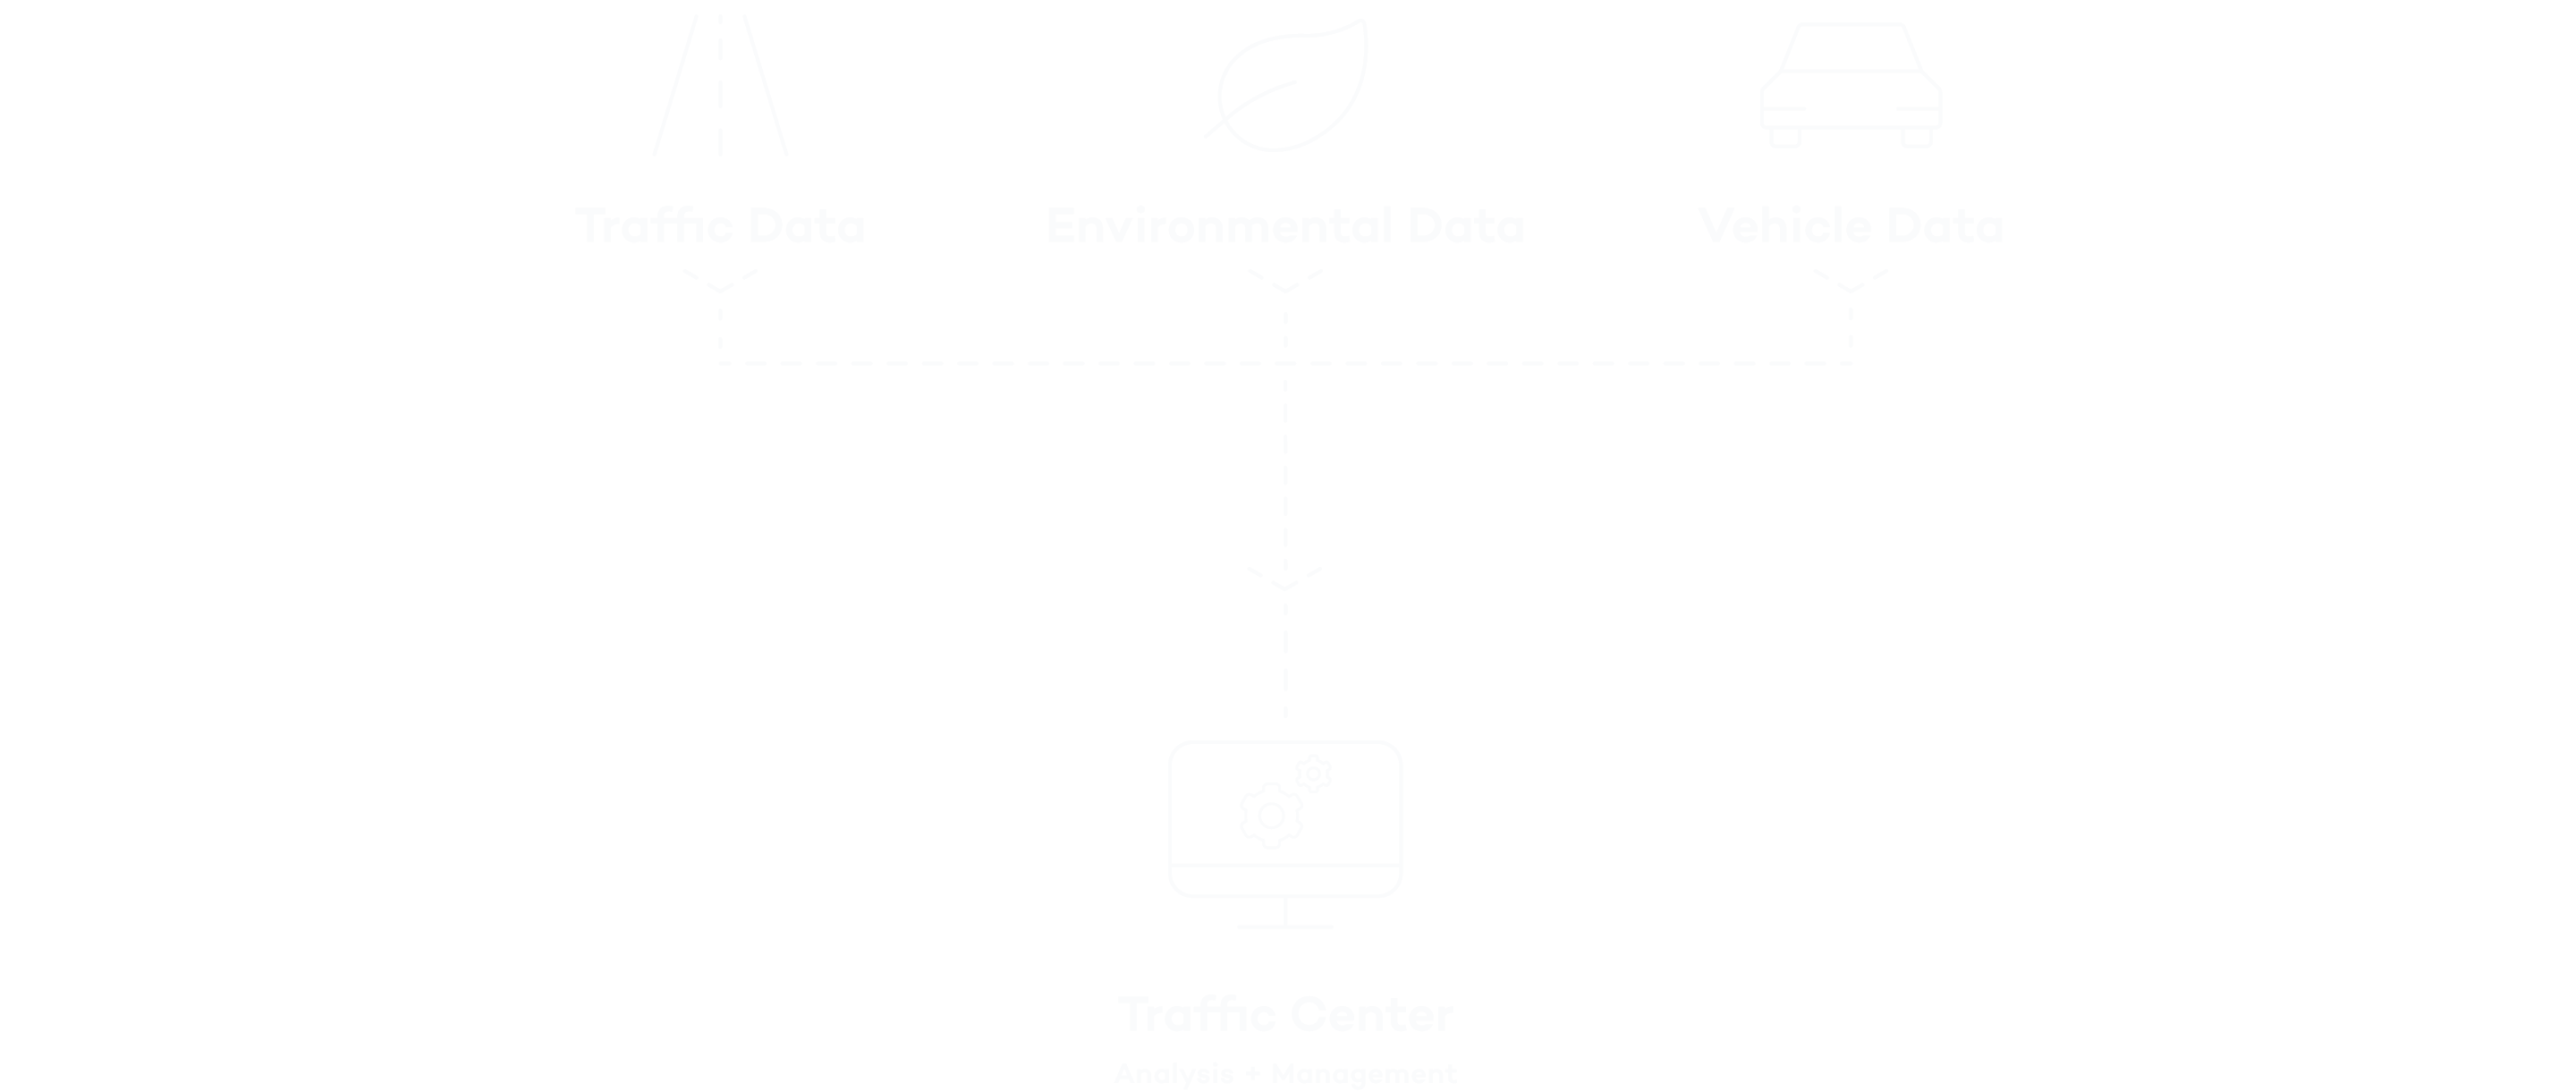 A smart network for traffic control